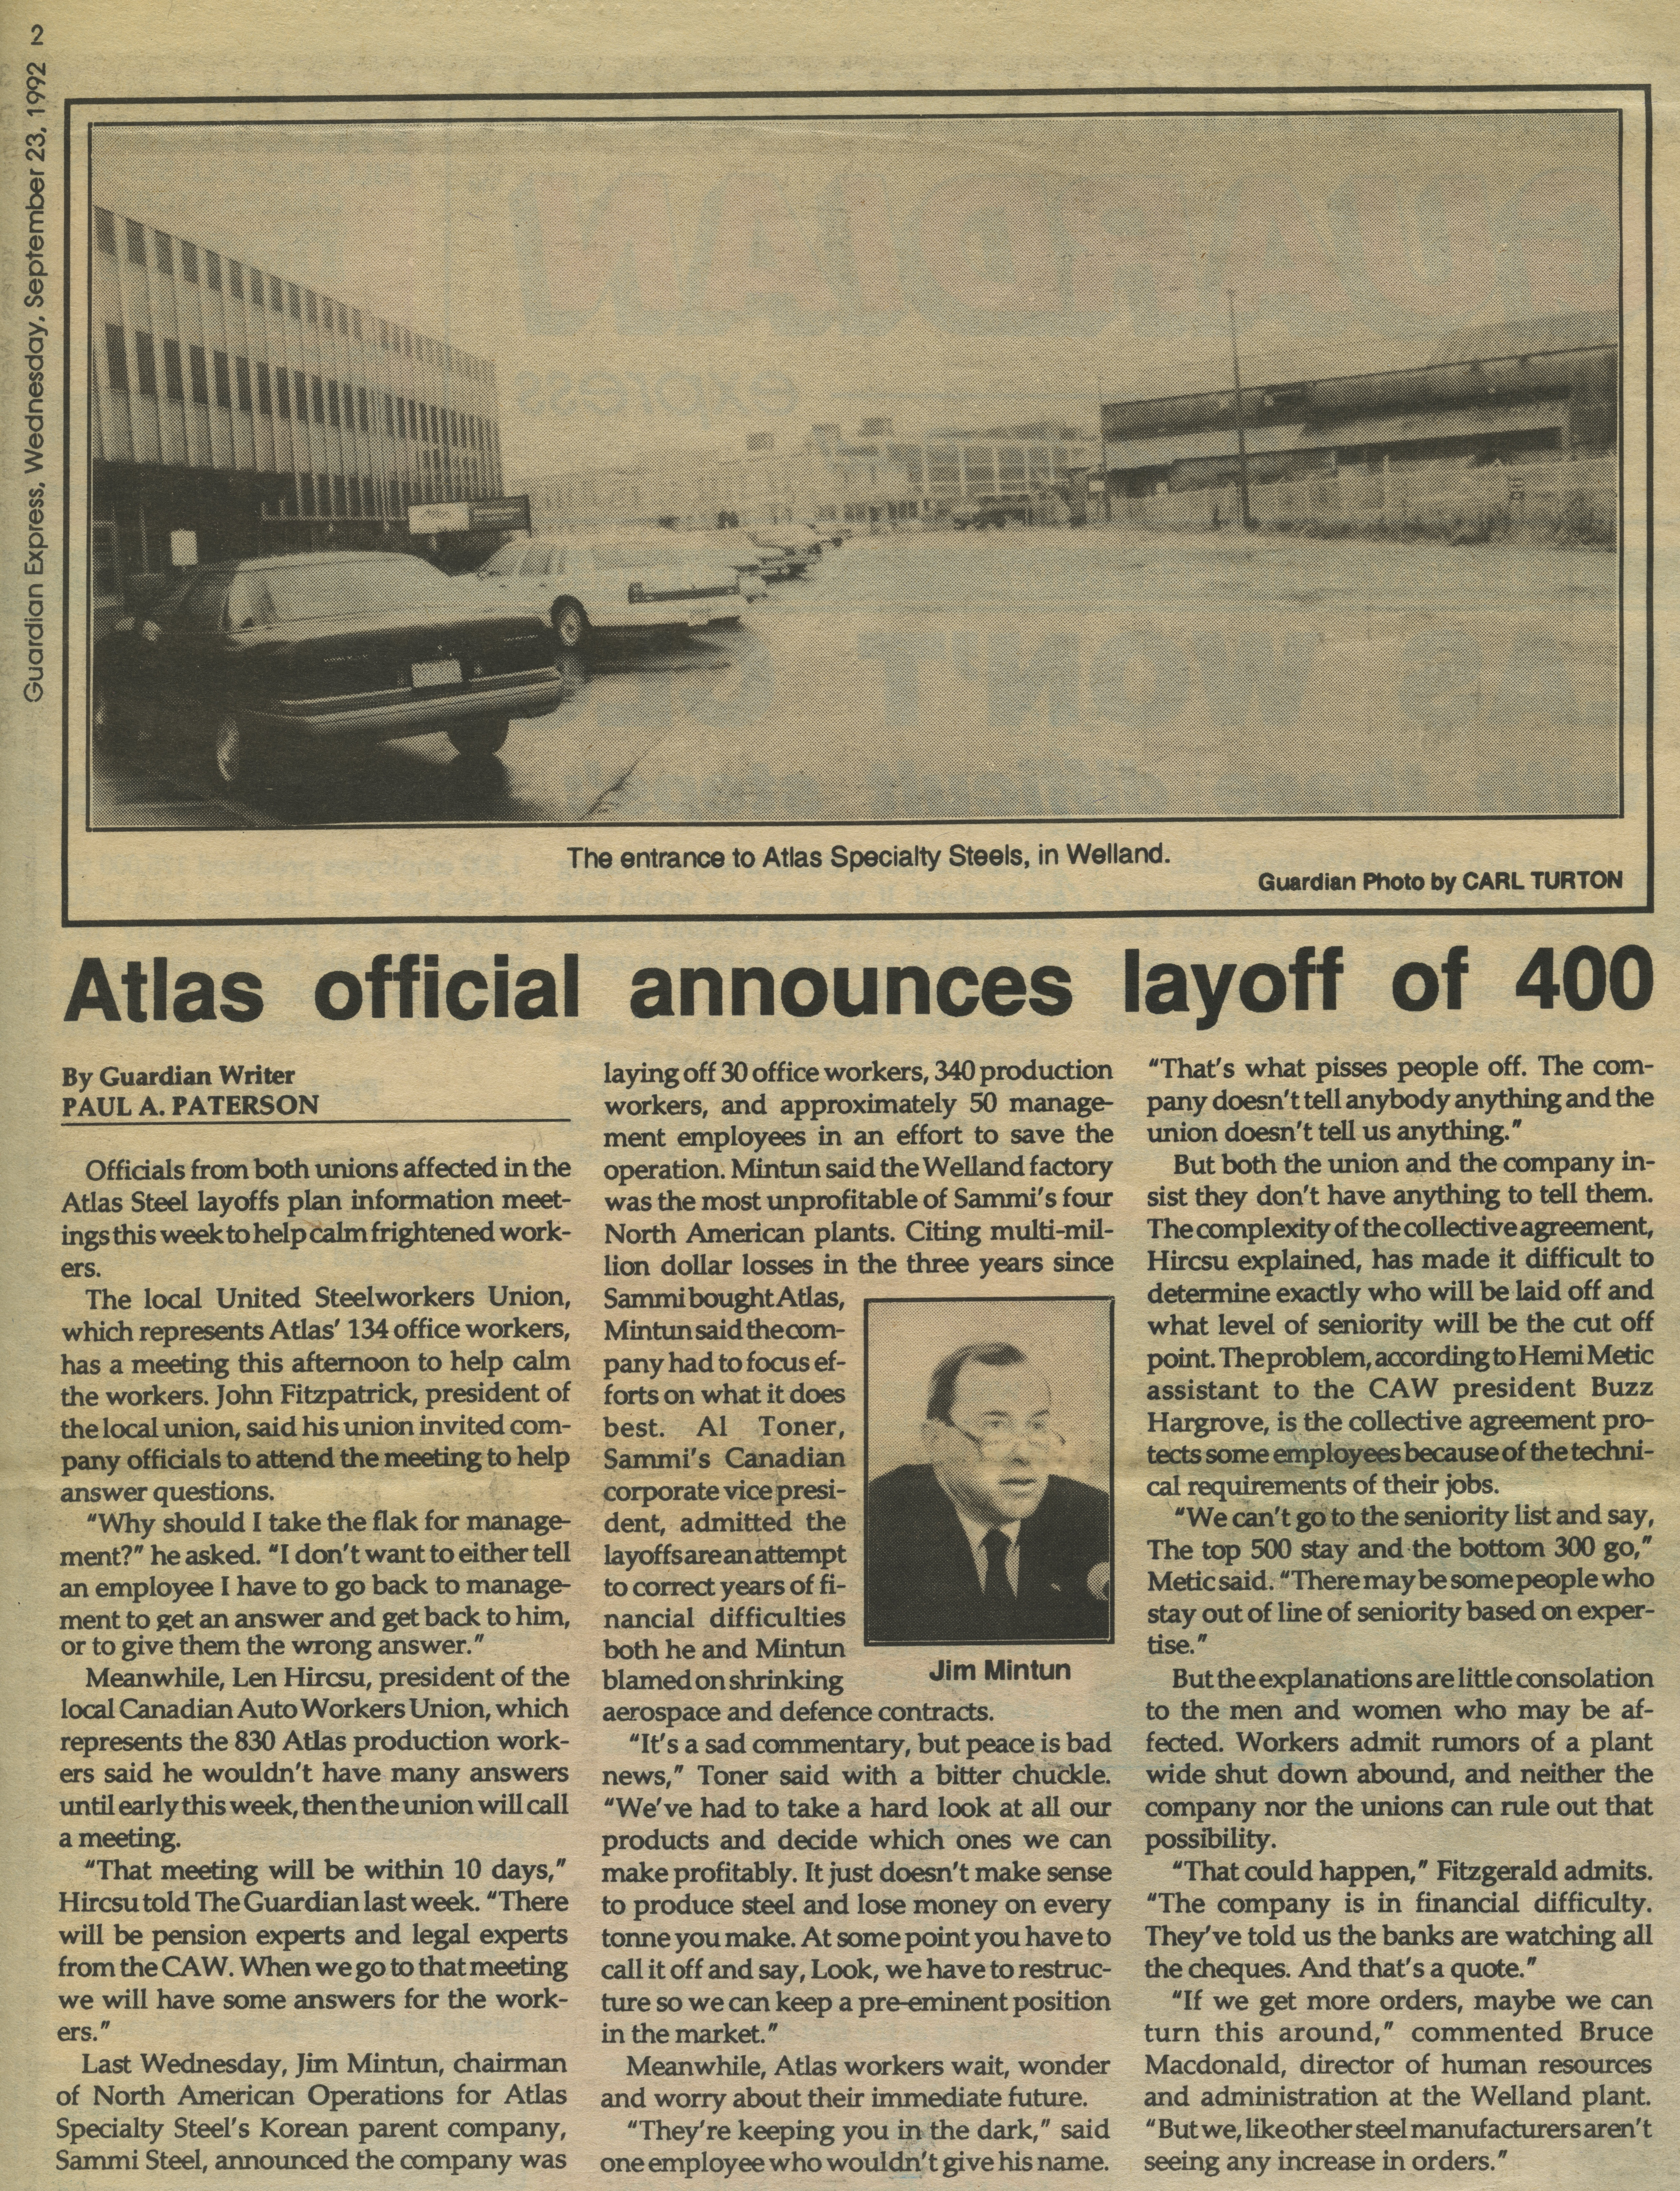 A newspaper clipping titled "Atlas official announces layoff of 400".